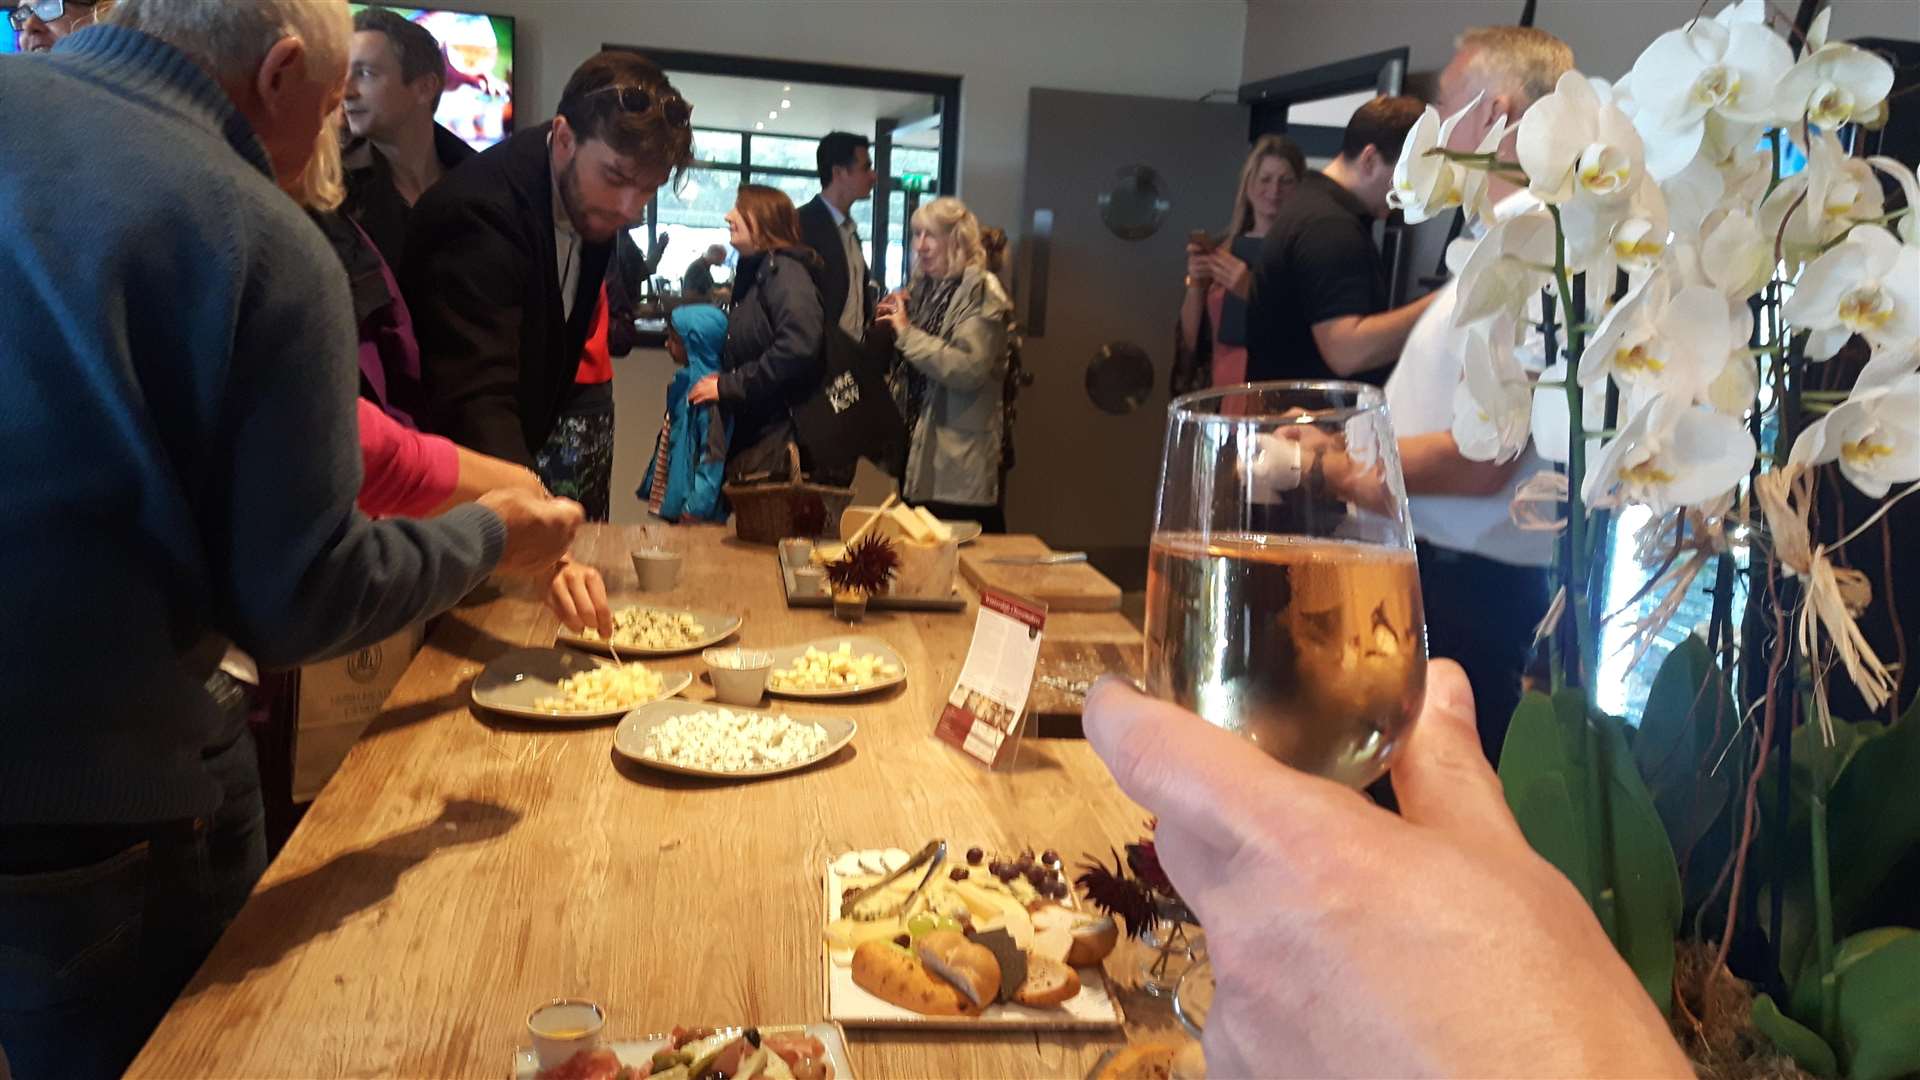 Guests could enjoy cheese tasting alongside the drinks